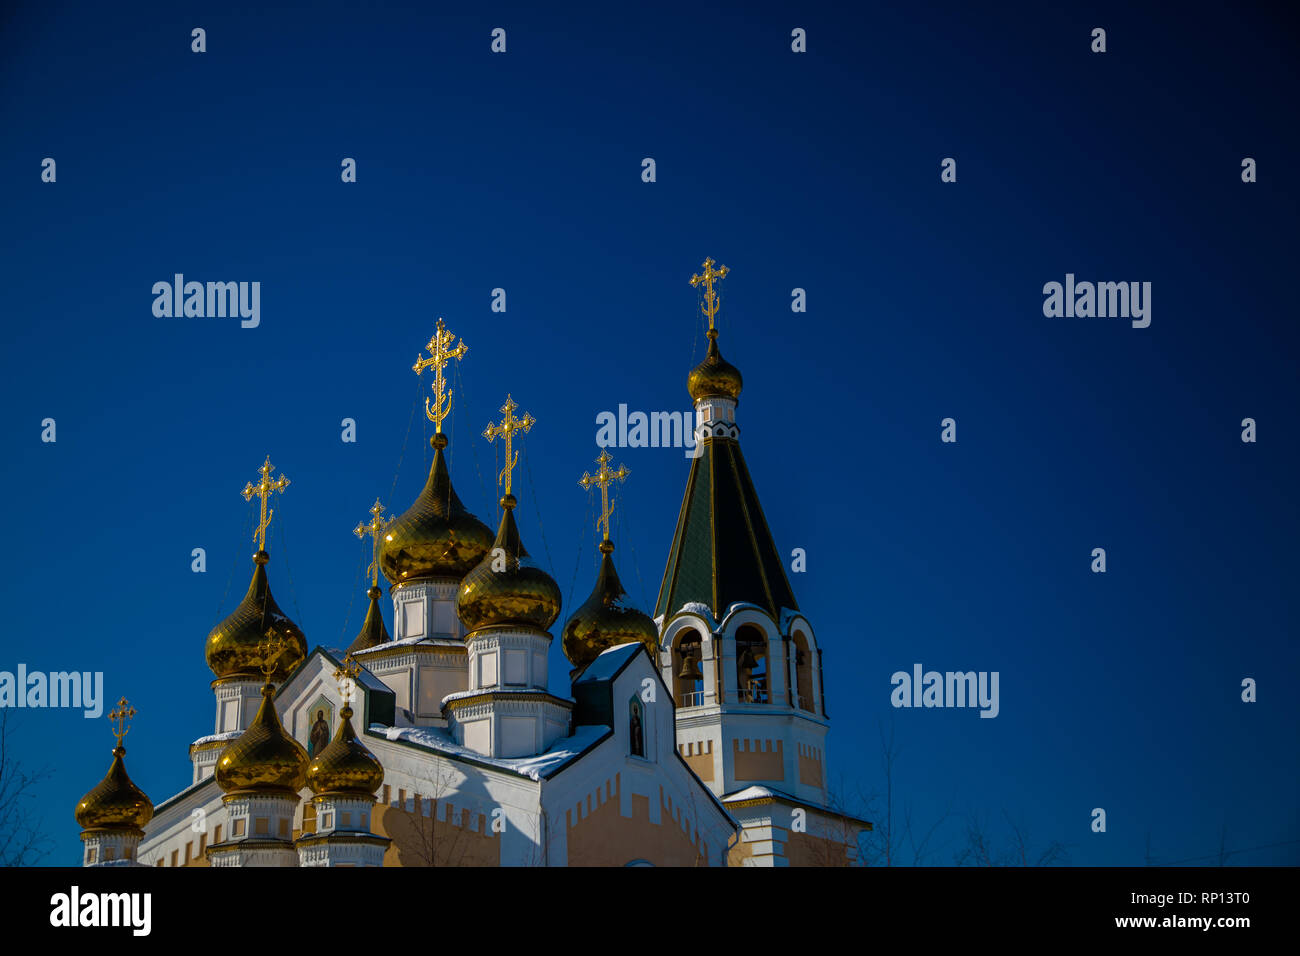 The crosses and onion domes of Russian Orthodox Church set against a blue sky. Stock Photo